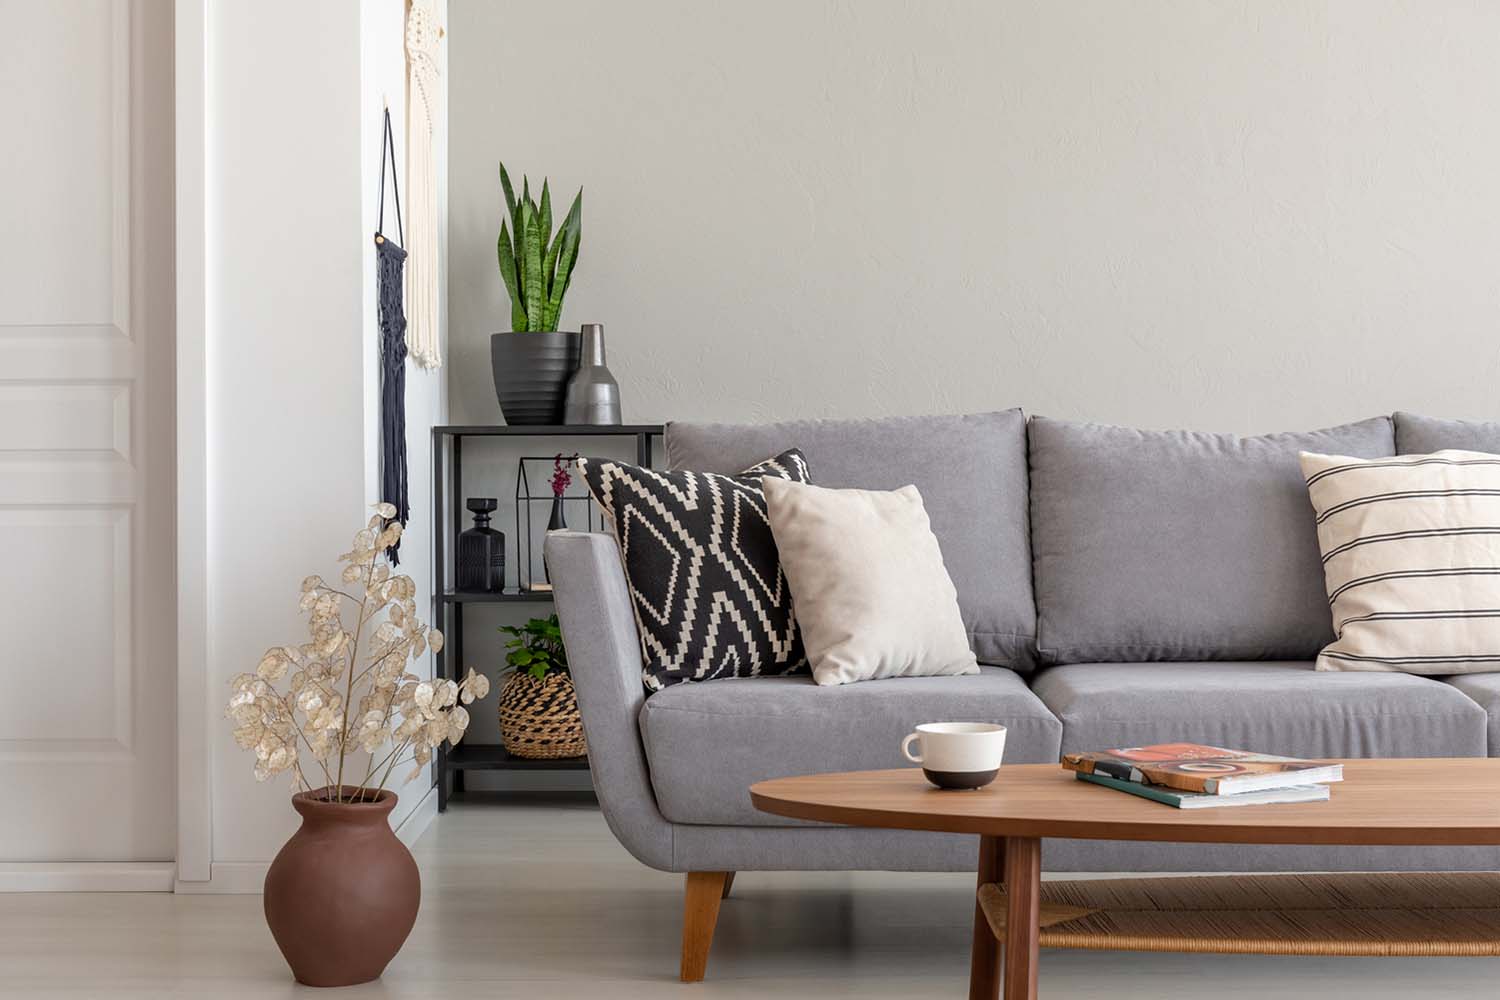 Flowers next to grey couch with pillows in minimal living room interior with wooden table.